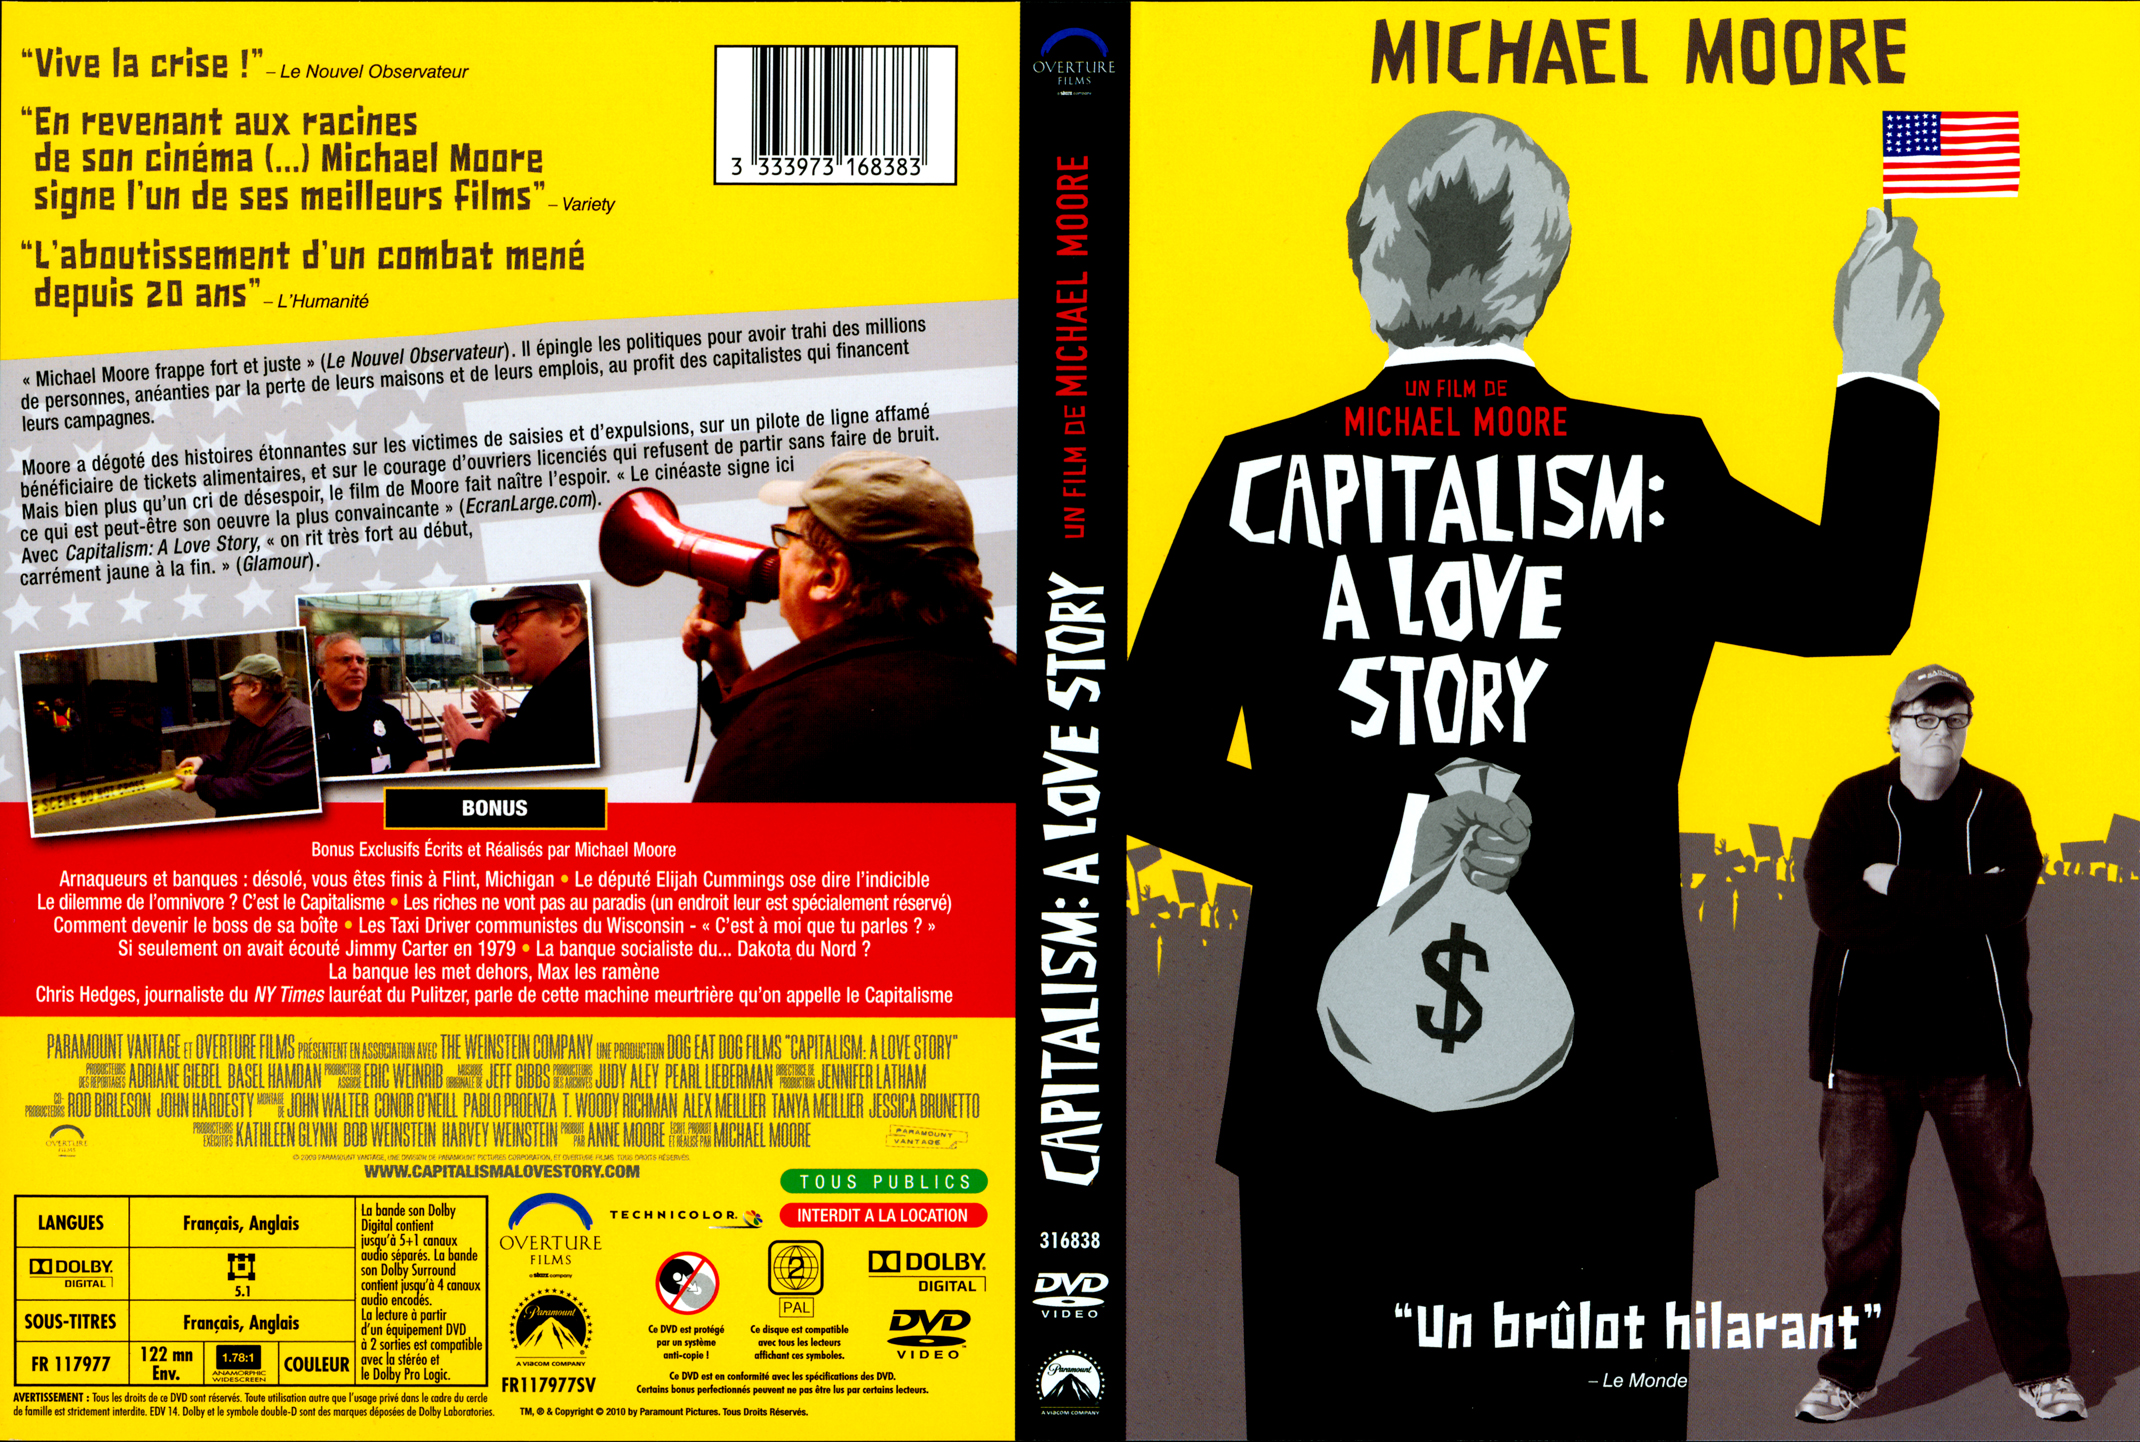 Jaquette DVD Capitalism A love story v2